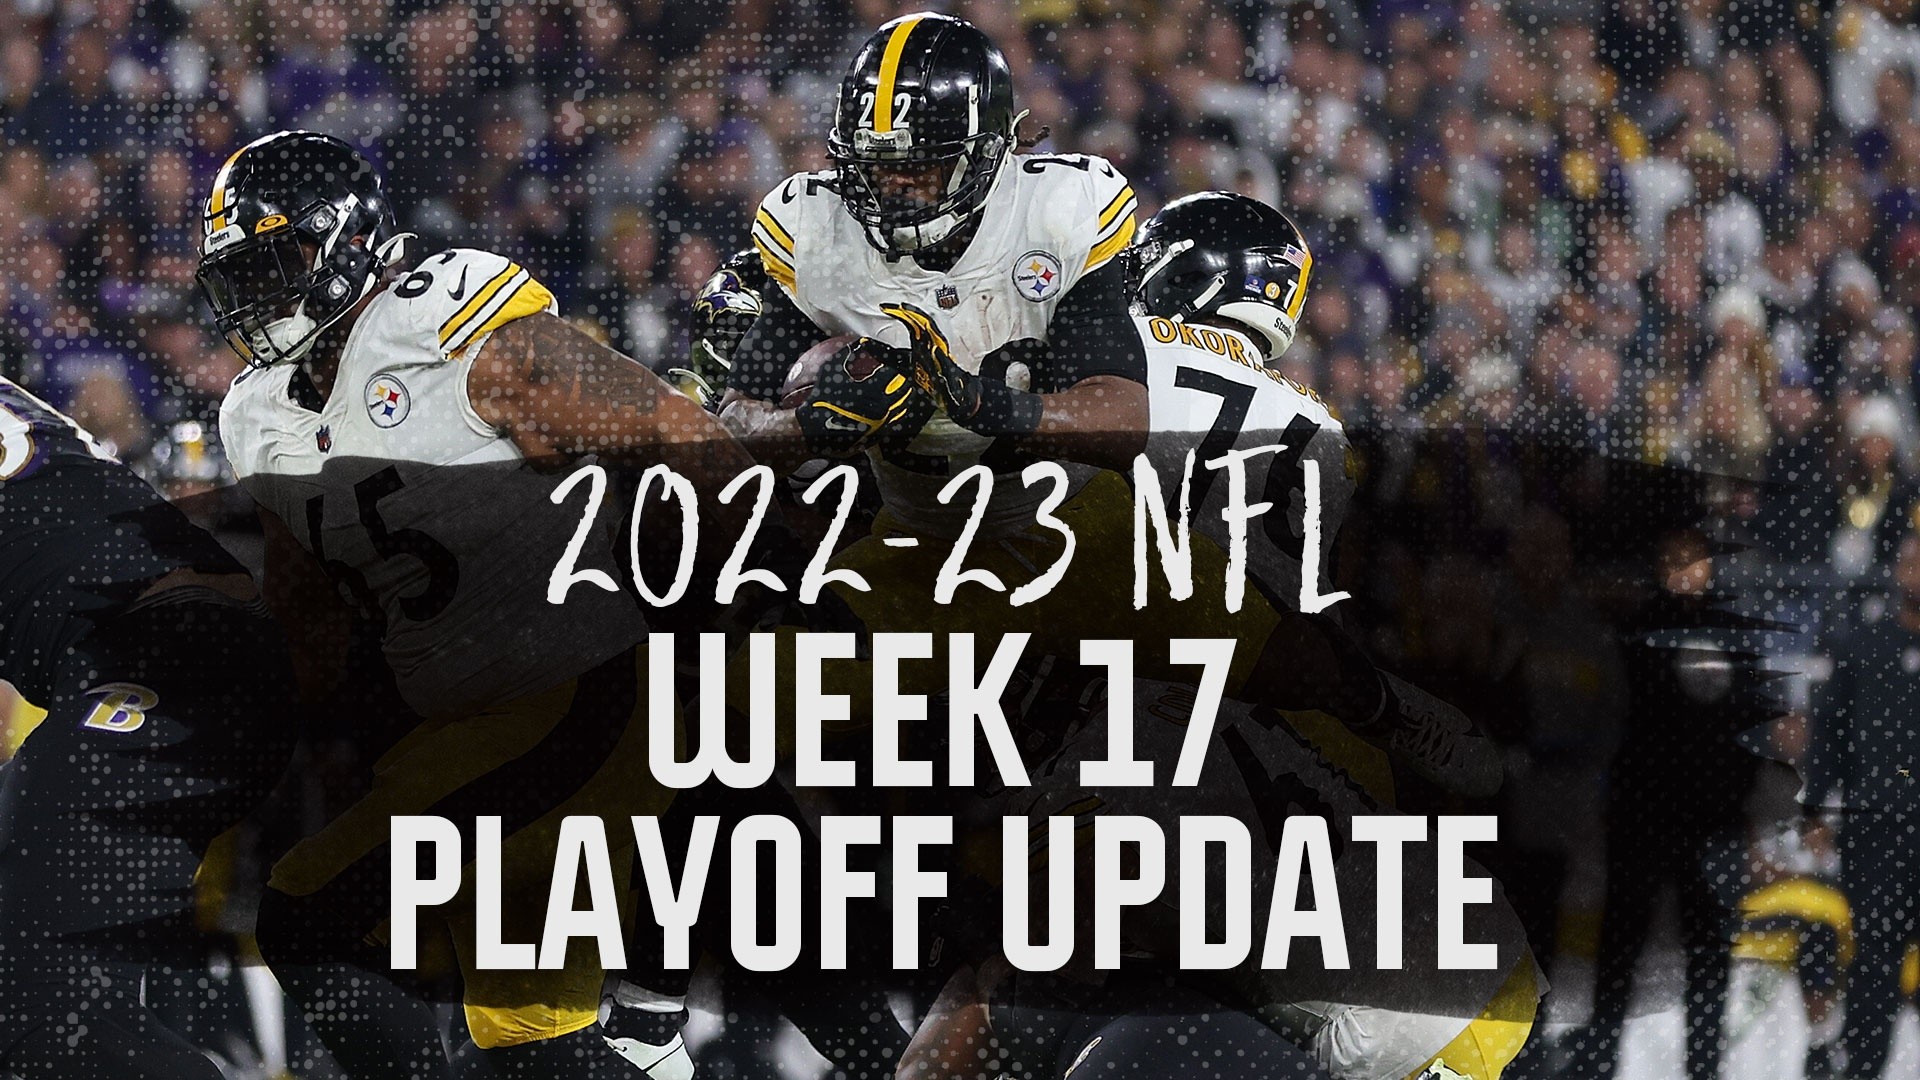 NFL Playoff Picture After Week 17 – NBC 5 Dallas-Fort Worth